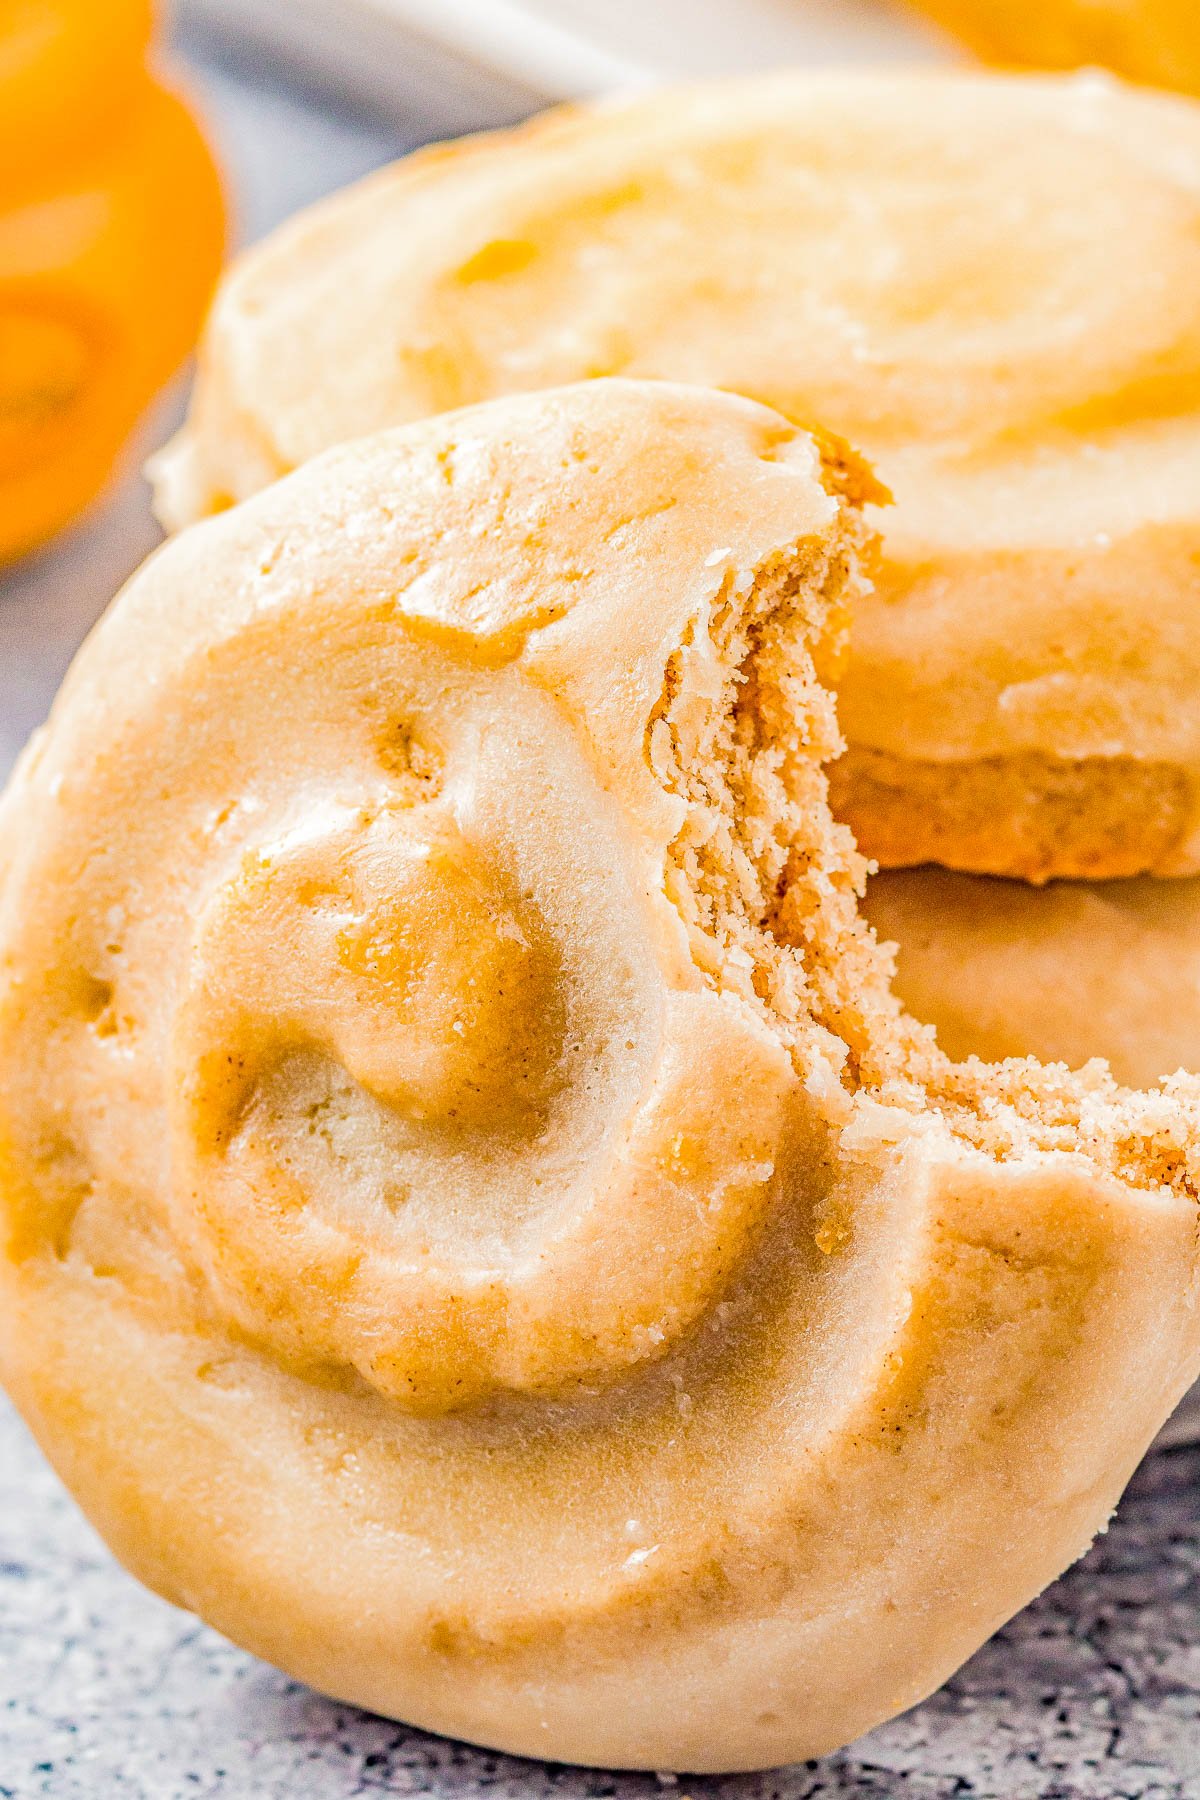 Honey Bun Cookies (Crumbl Cookies Copycat) - Soft and chewy with a warm buttery cinnamon flavor, these cookies resemble a classic Honey Bun with their fun swirl on top! The sweet honey glaze makes them IRRESISTIBLE! This EASY Crumbl Cookies copycat recipe will become a family FAVORITE! 